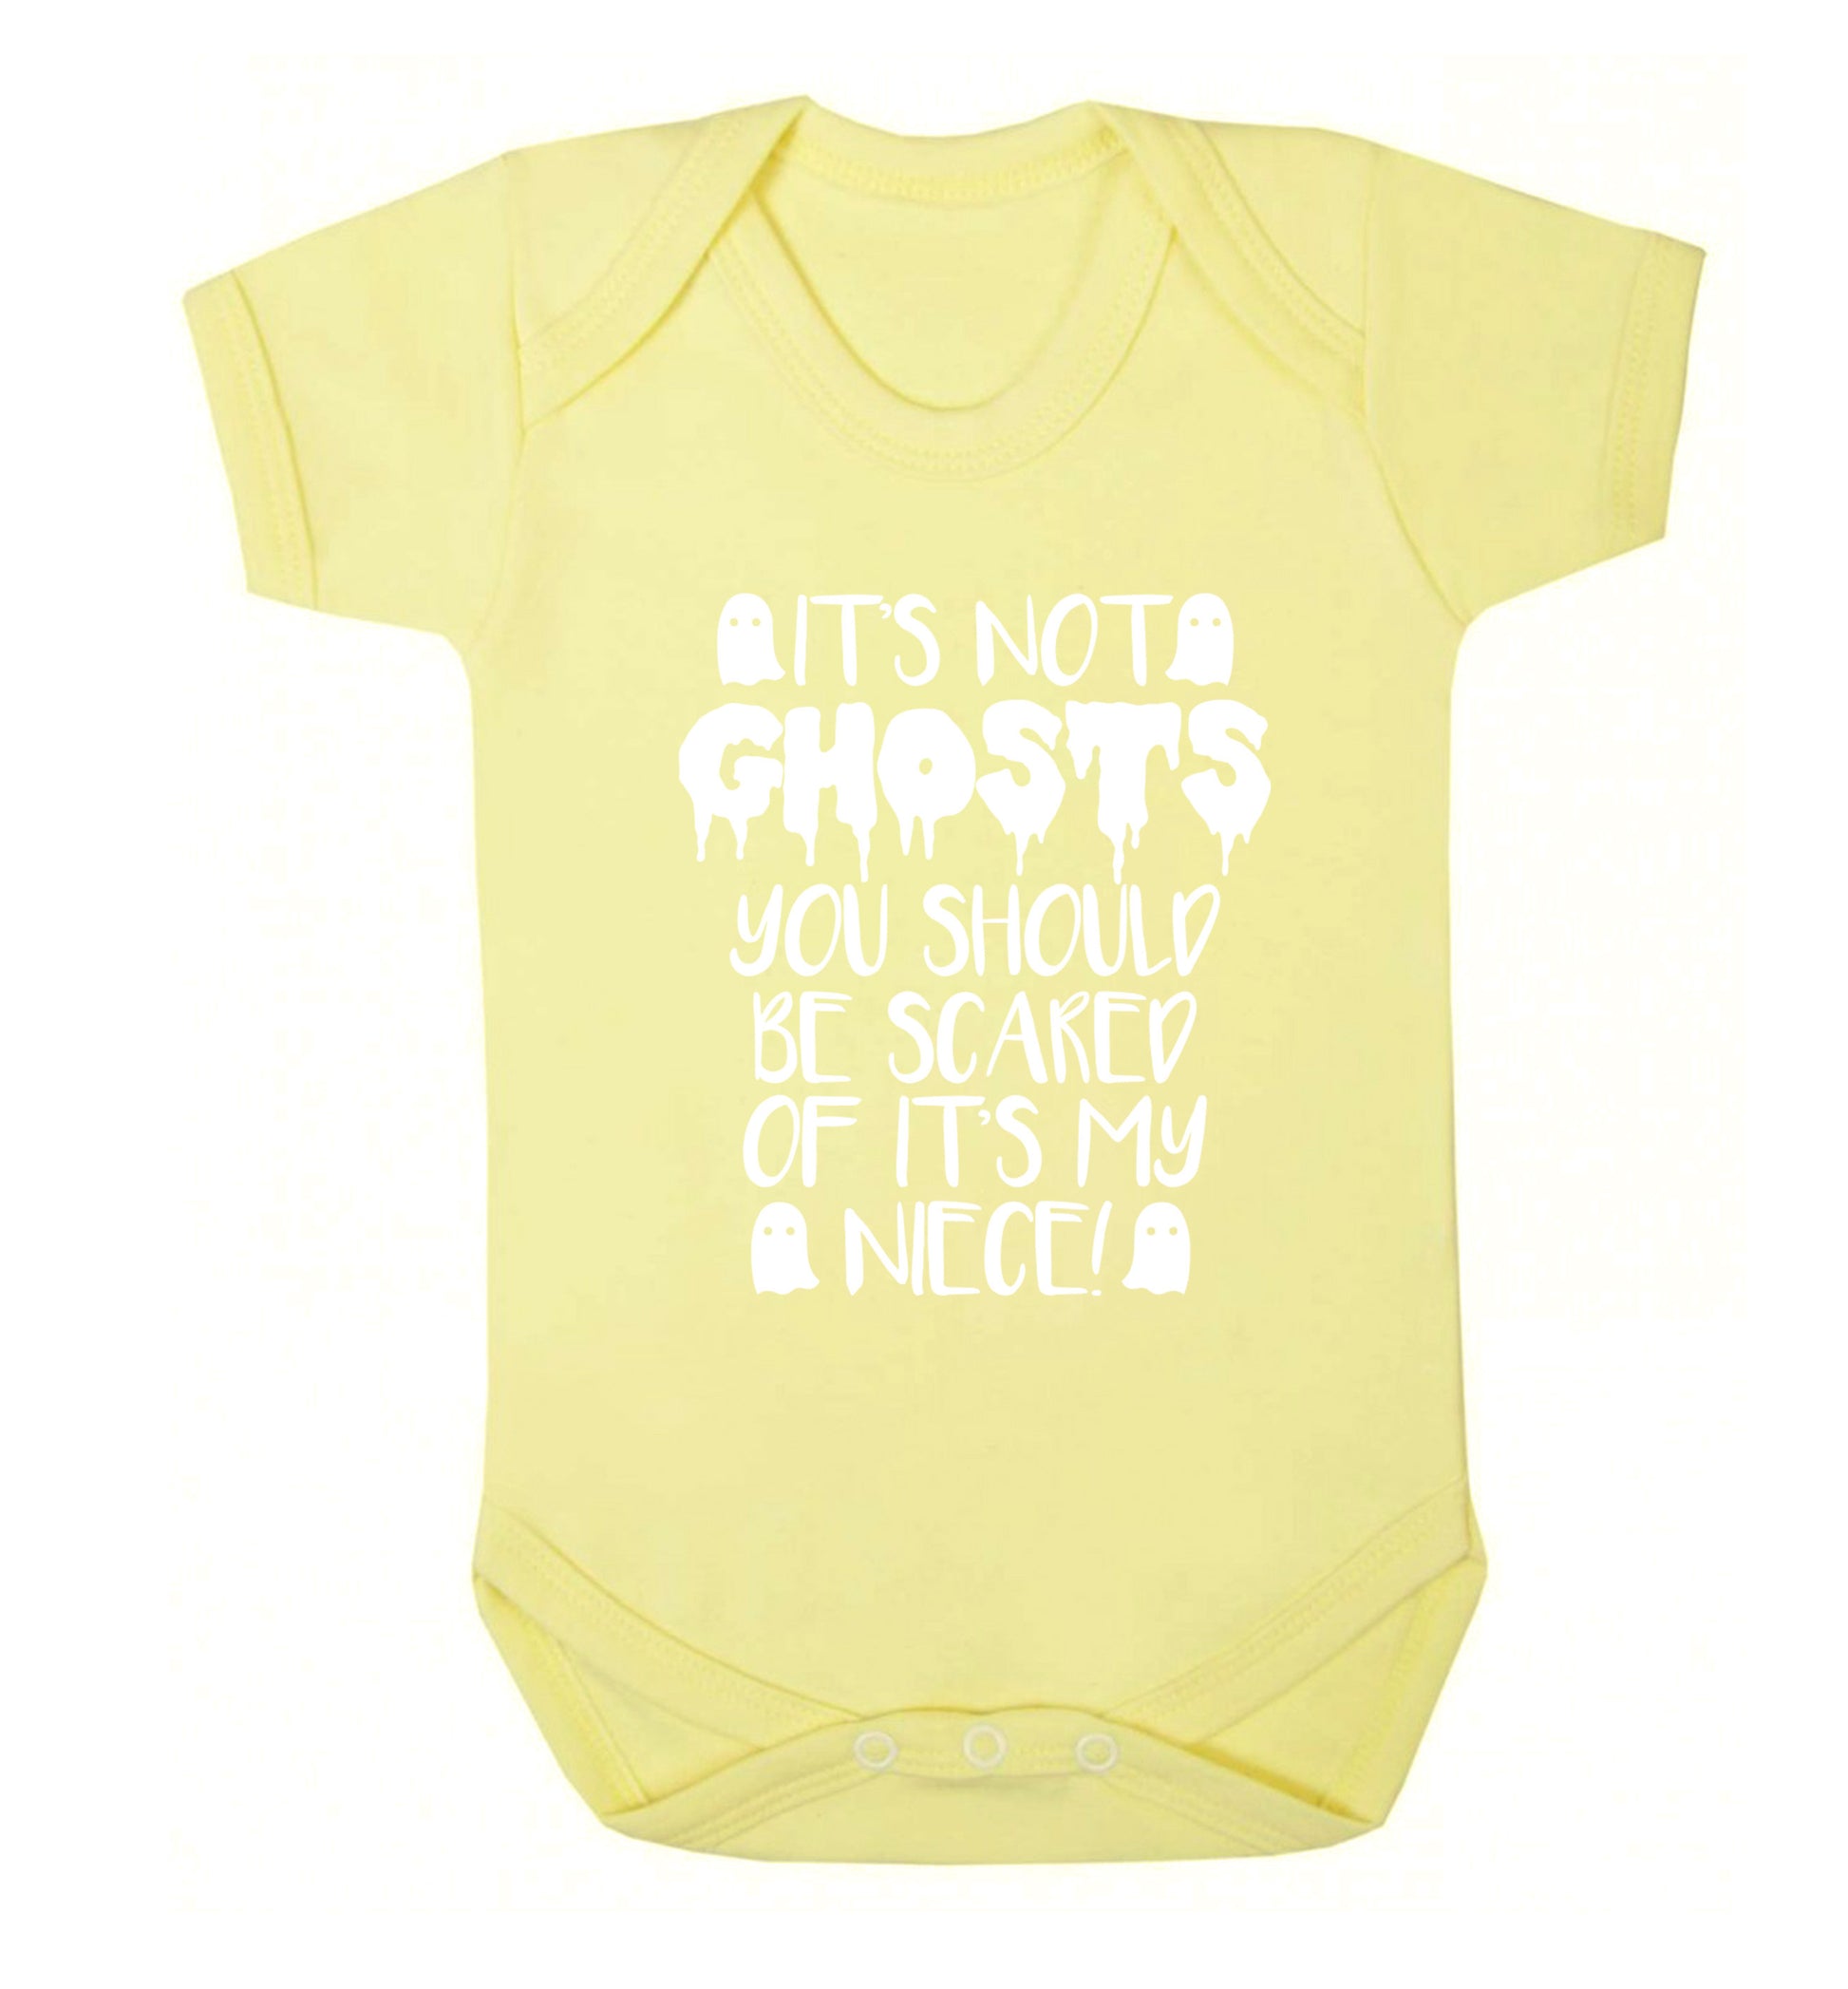 It's not ghosts you should be scared of it's my niece! Baby Vest pale yellow 18-24 months